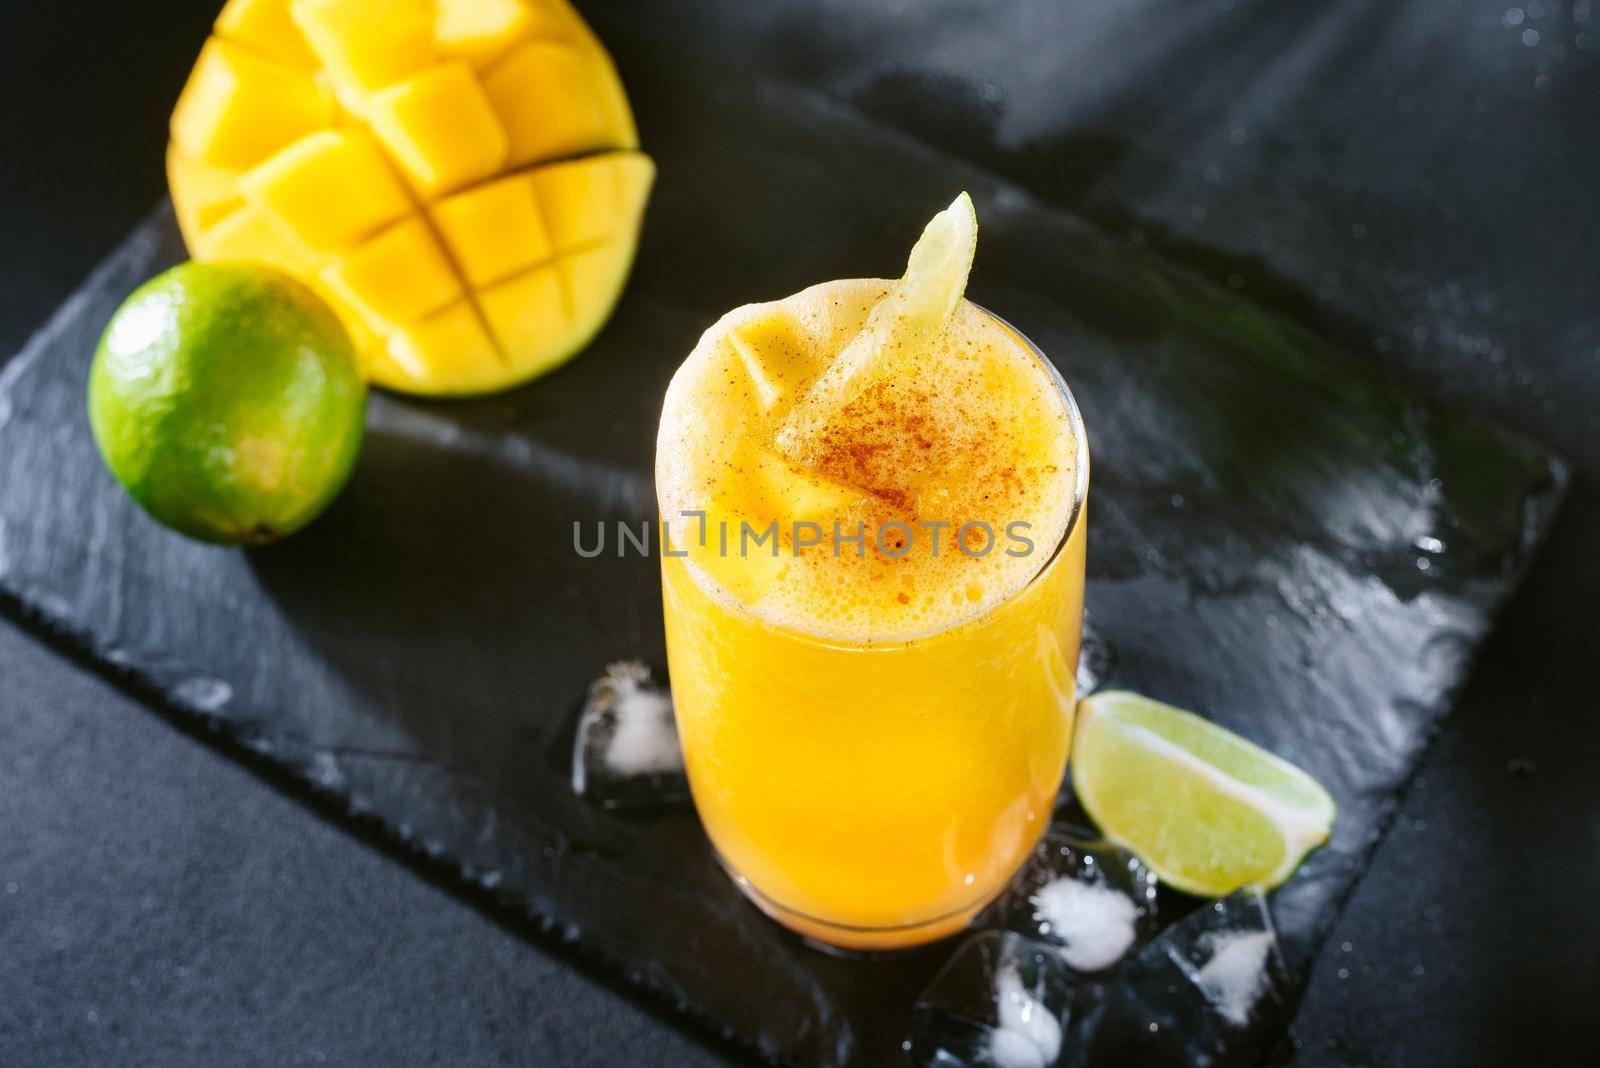 Mexican or Latin American cuisine. The classic Mexican and Southern U.S. cocktail is the Mangonada. A refreshing cocktail of mango salt and lime and chili peppers by gulyaevstudio